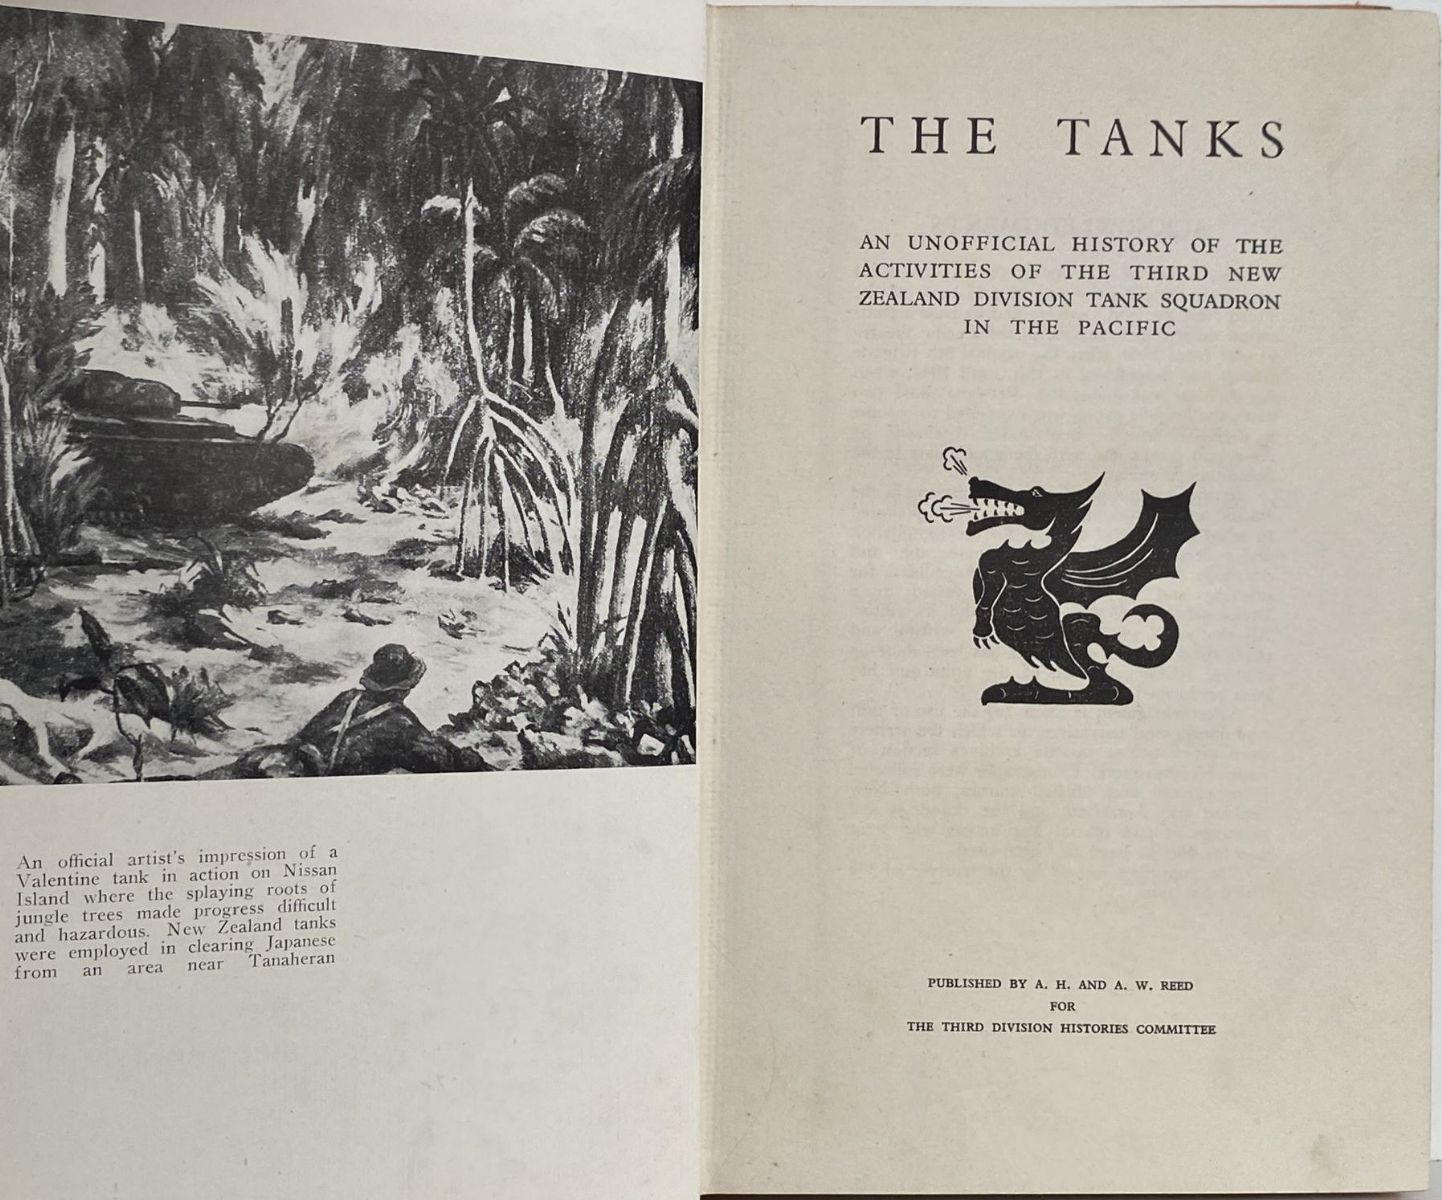 THE TANKS, MMGs, & ORDINANCE: History of the 3rd Division Tank Squadron NZEF IP